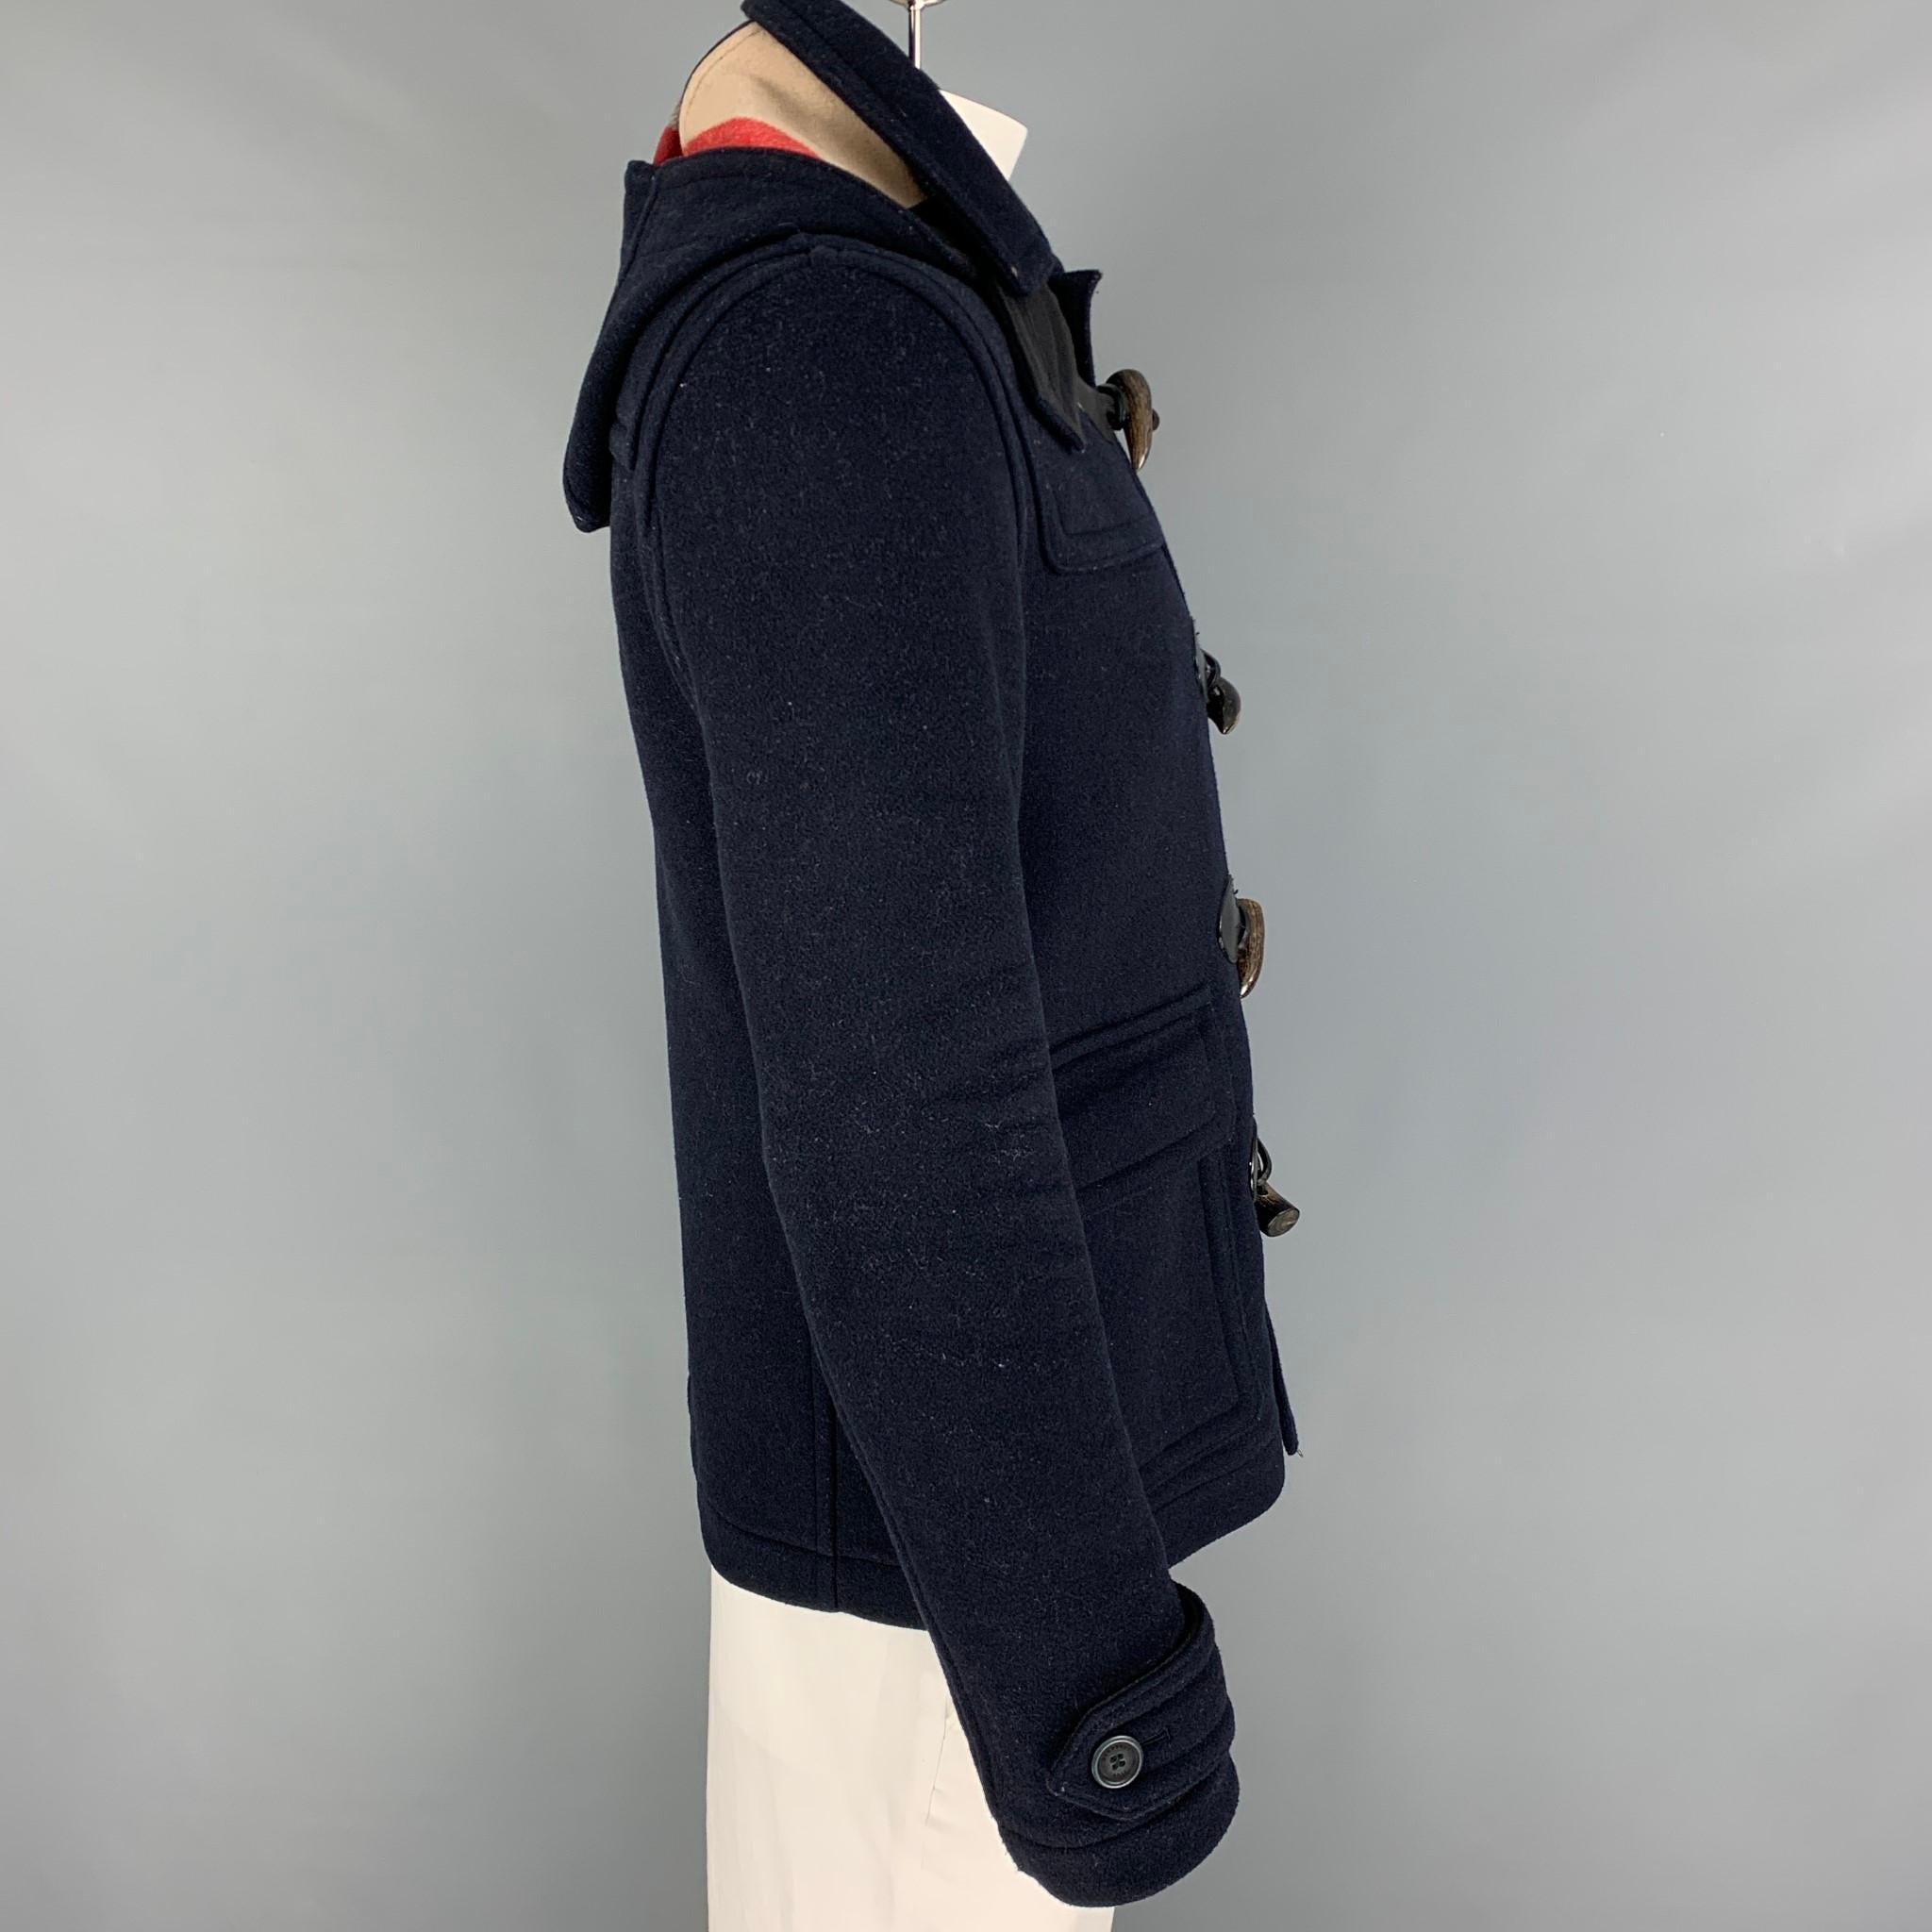 BURBERRY BRIT coat comes in a navy wool / polyamide with a plaid lining featuring a hooded style, flap pockets, and a toggle button closure. 

Very Good Pre-Owned Condition. Moderate wear throughout. As-is.
Marked: M

Measurements:

Shoulder: 18.5